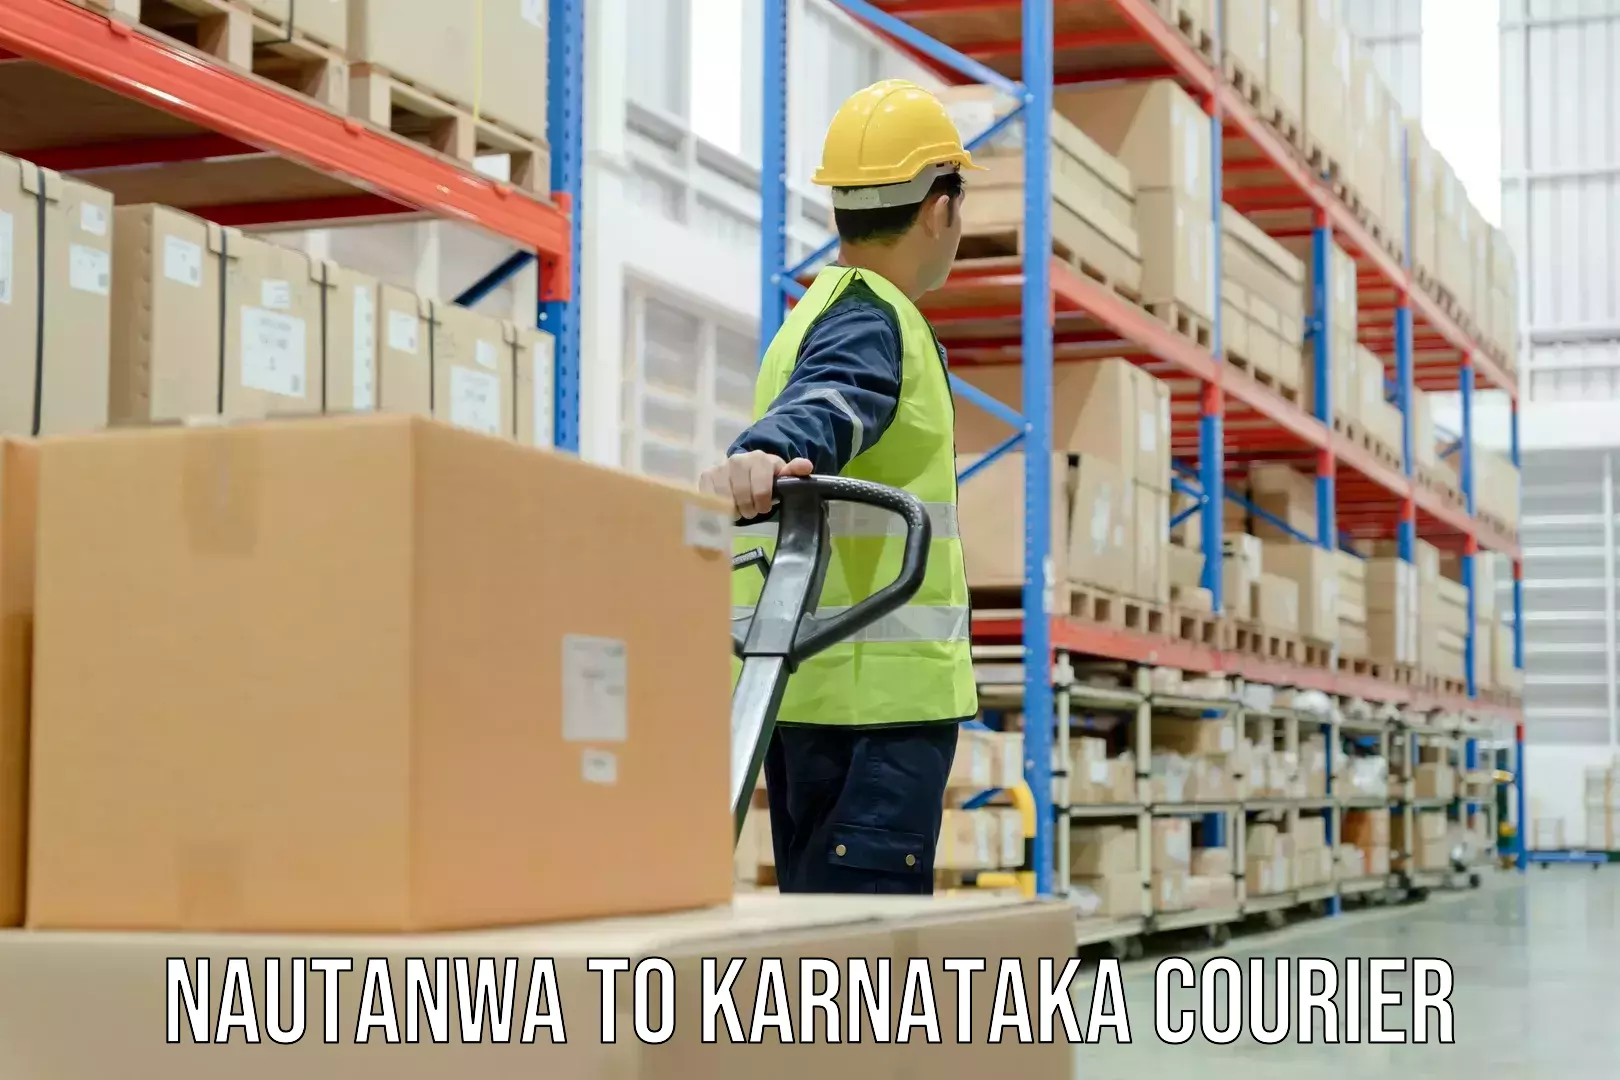 Customer-friendly courier services Nautanwa to Mangalore Port